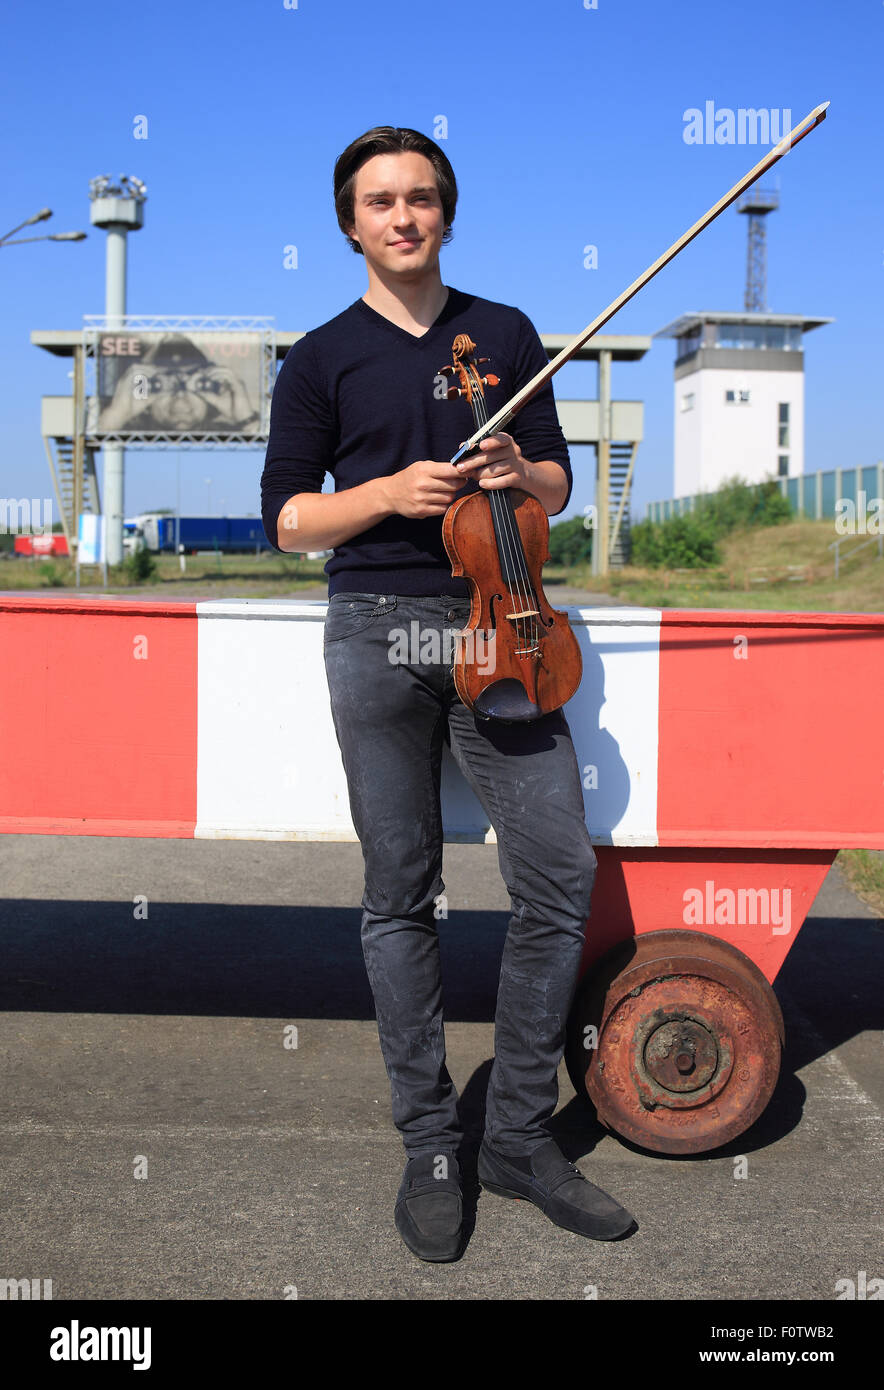 Marienborn, Germany. 21st Aug, 2015. Concert violinist Sven Stucke during a press shoot on the premises of the memorial 'Deutsche Teilung' (lt: German division) in Marienborn, Germany, 21 August 2015. There, the concert project 'The Sound of Unity - 25 Jahre Deutsche Einheit' (lt: 25 Years of German Unity) is being presented. Shows are being held on on the anniversaries of the Two Plus Four agreement in Mageburg. Photo: JENS WOLF/dpa/Alamy Live News Stock Photo